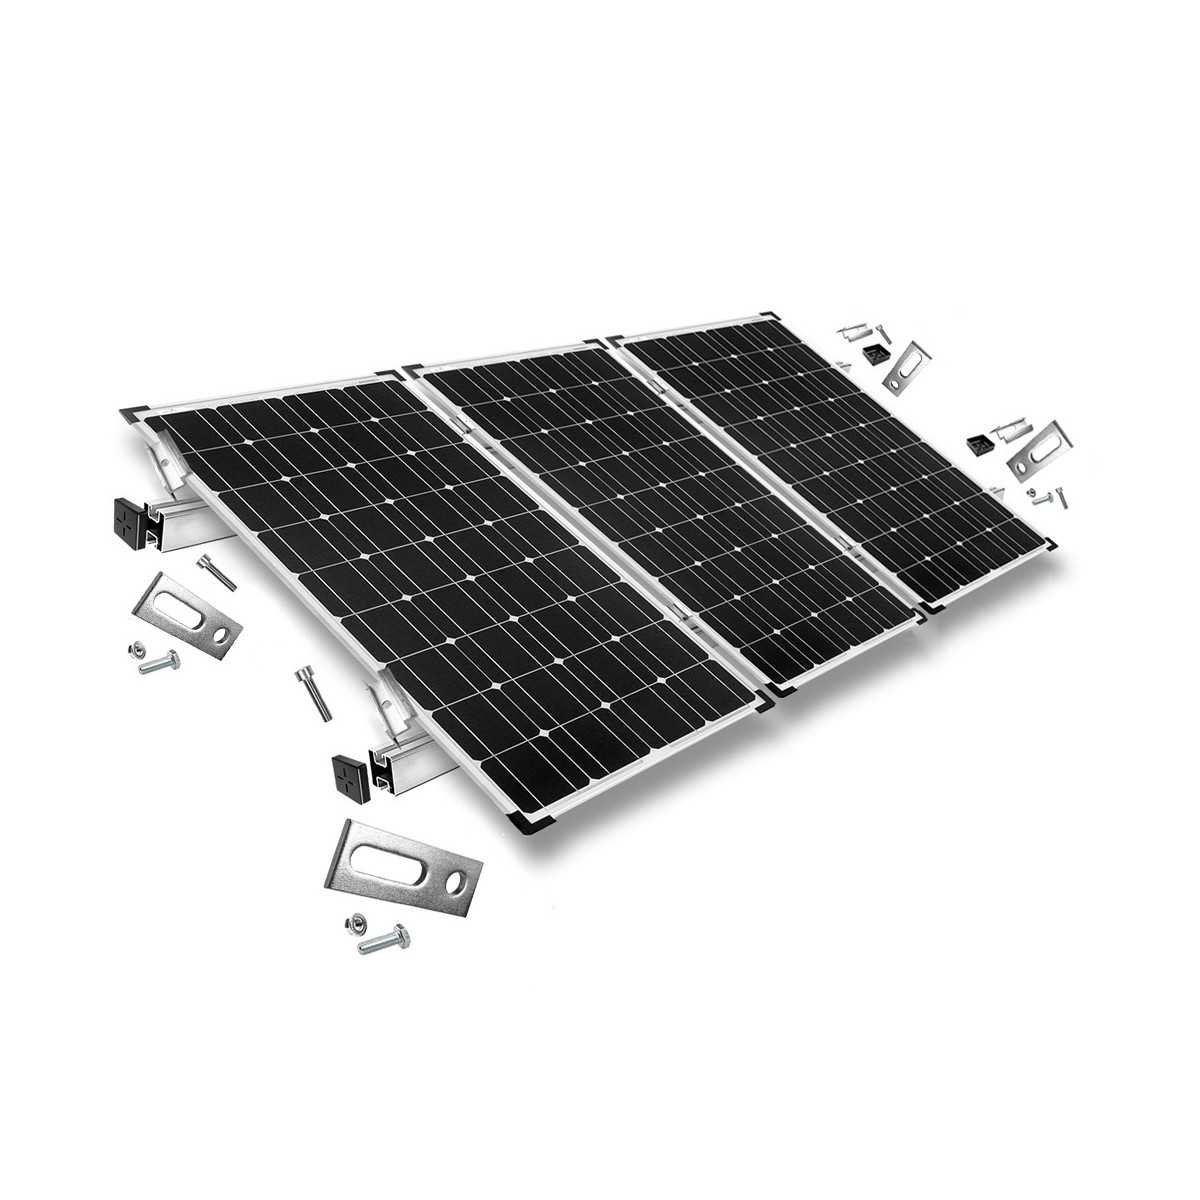 Mounting kit h35 with roof studs for pitched roof 3 frame 35 mm solar panels